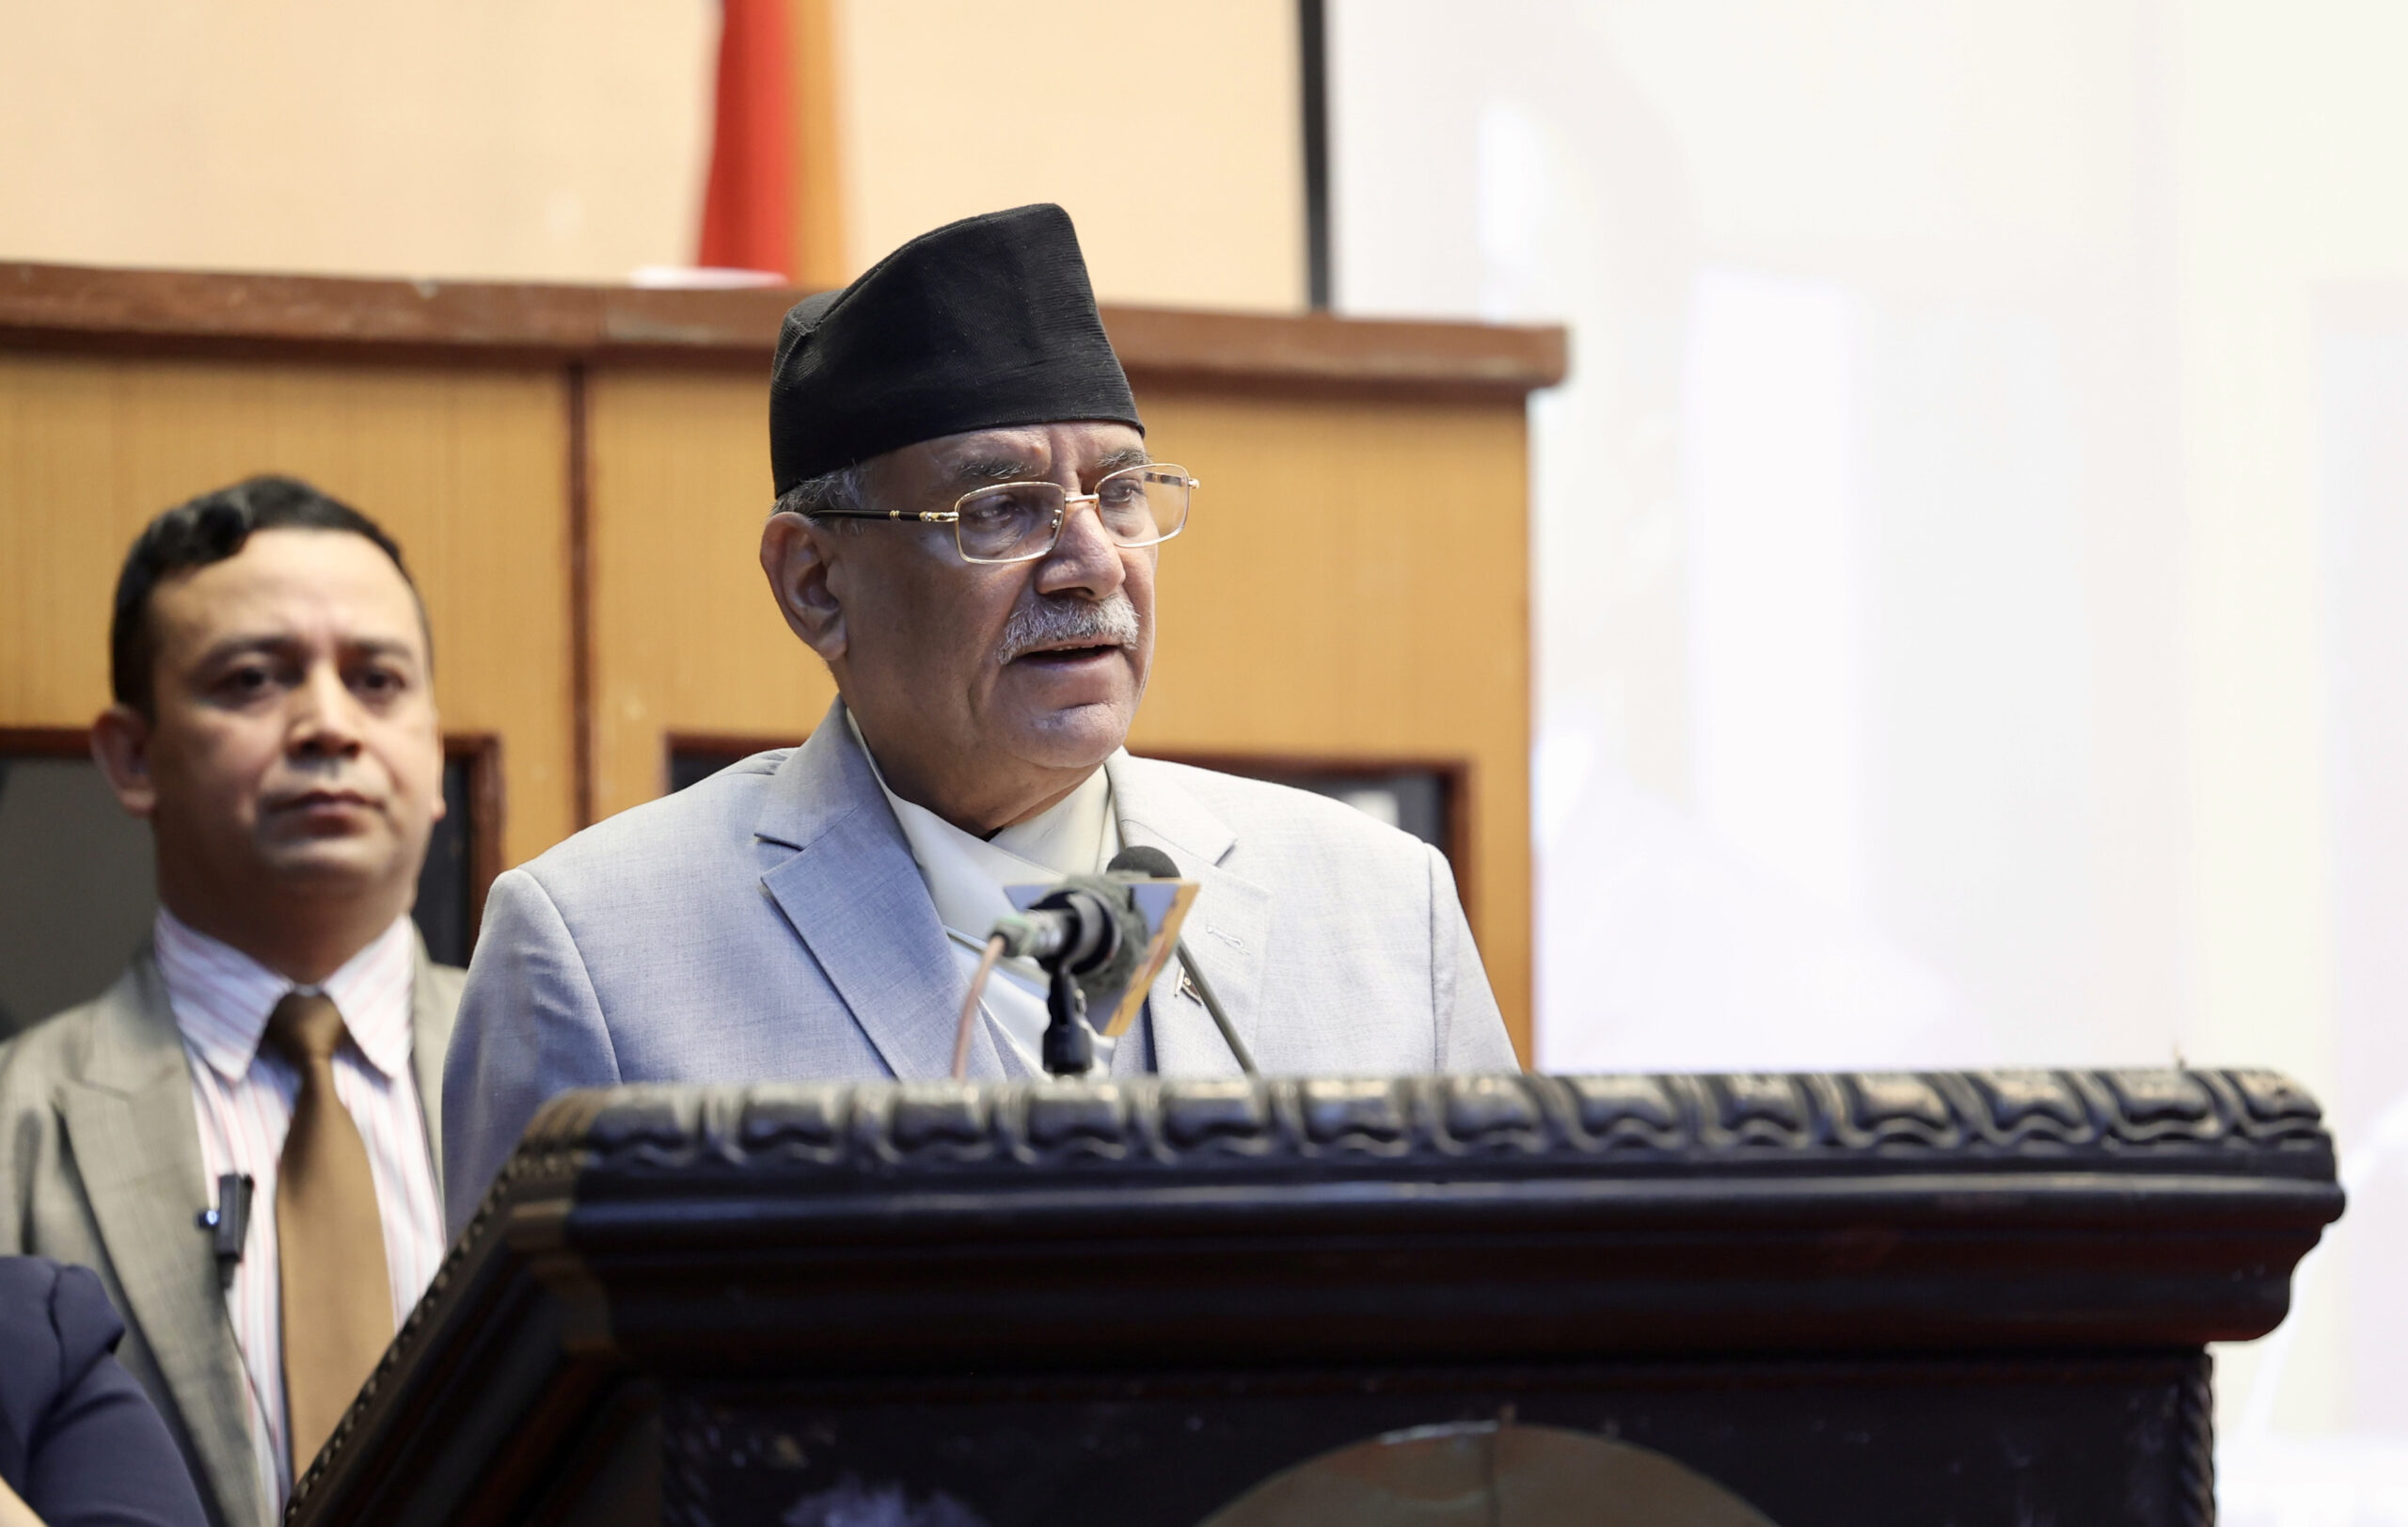 Govt prioritises promotion of human rights: PM Dahal